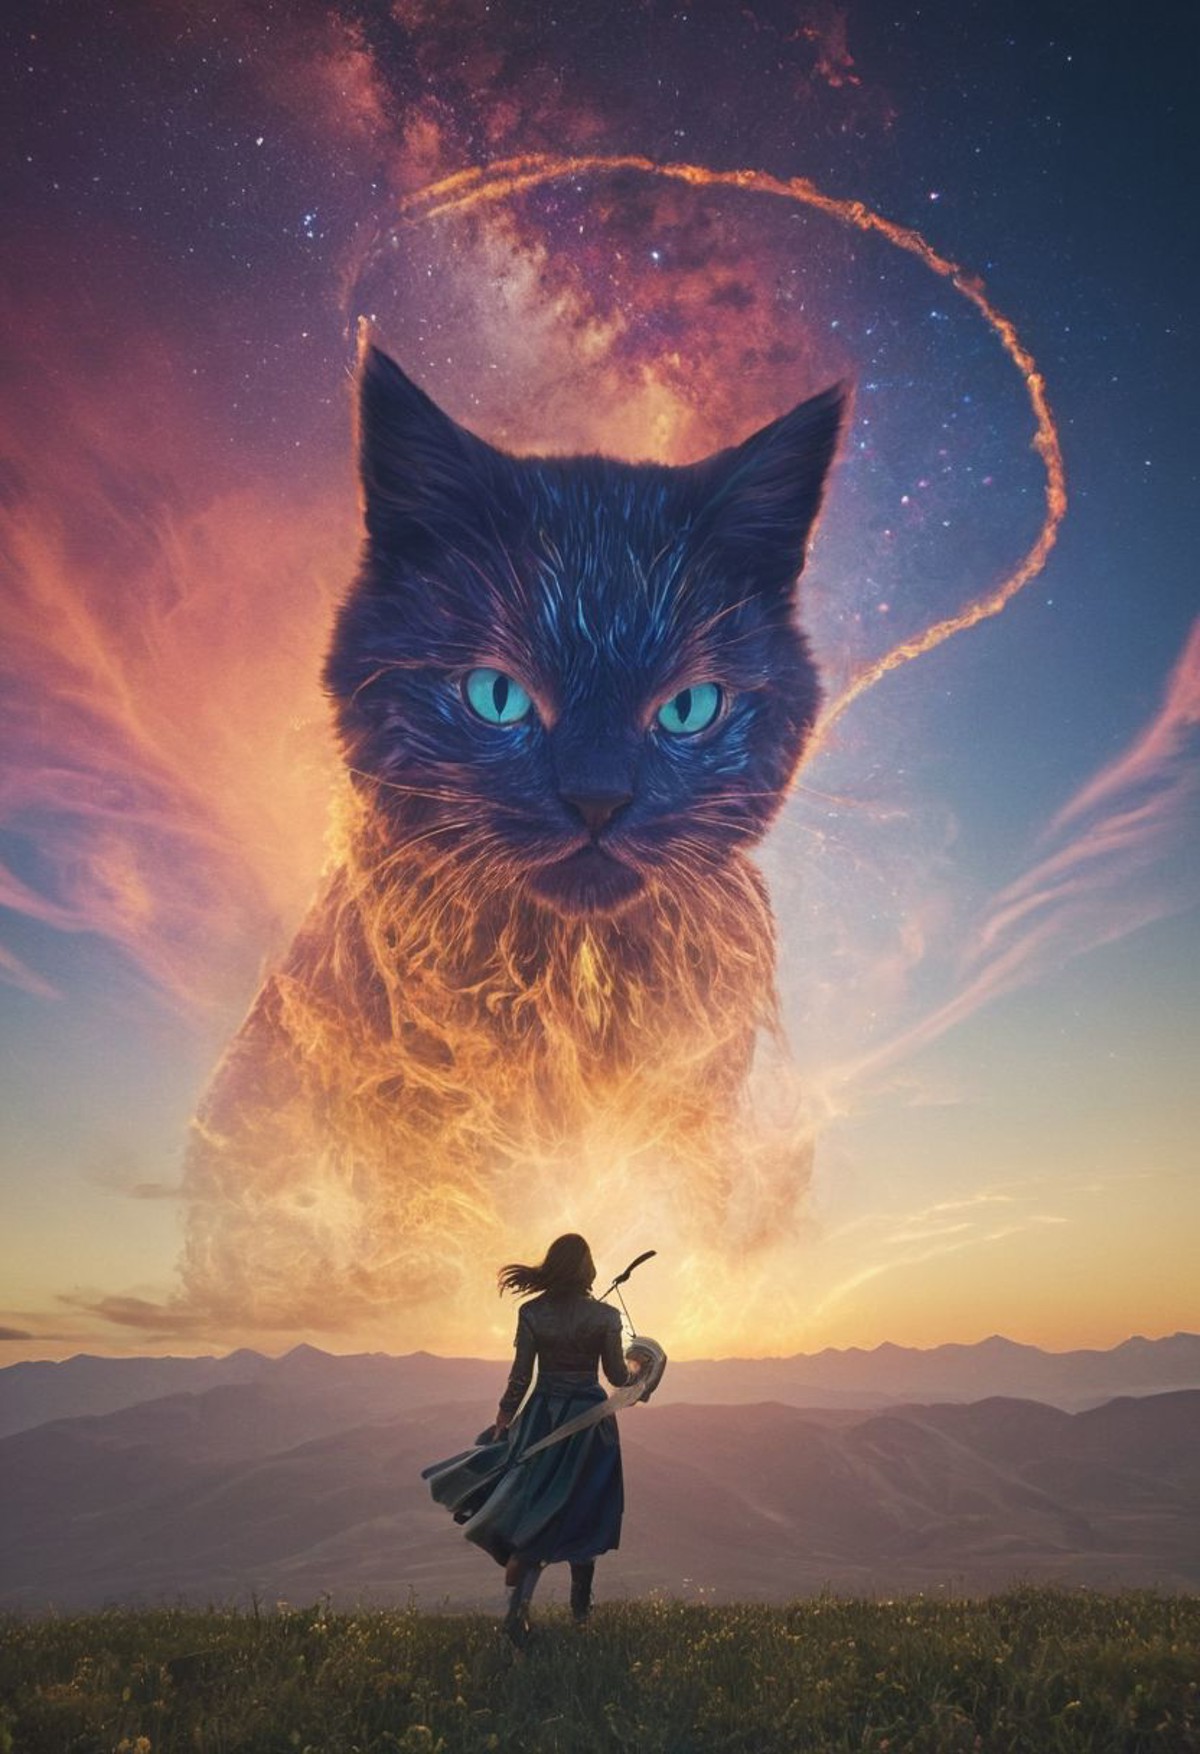 Bosstyle, a Woman fighting a giant cute kitty-kite Boss By Wes Anderson and HR Giger: Capture the essence of nostalgia and...